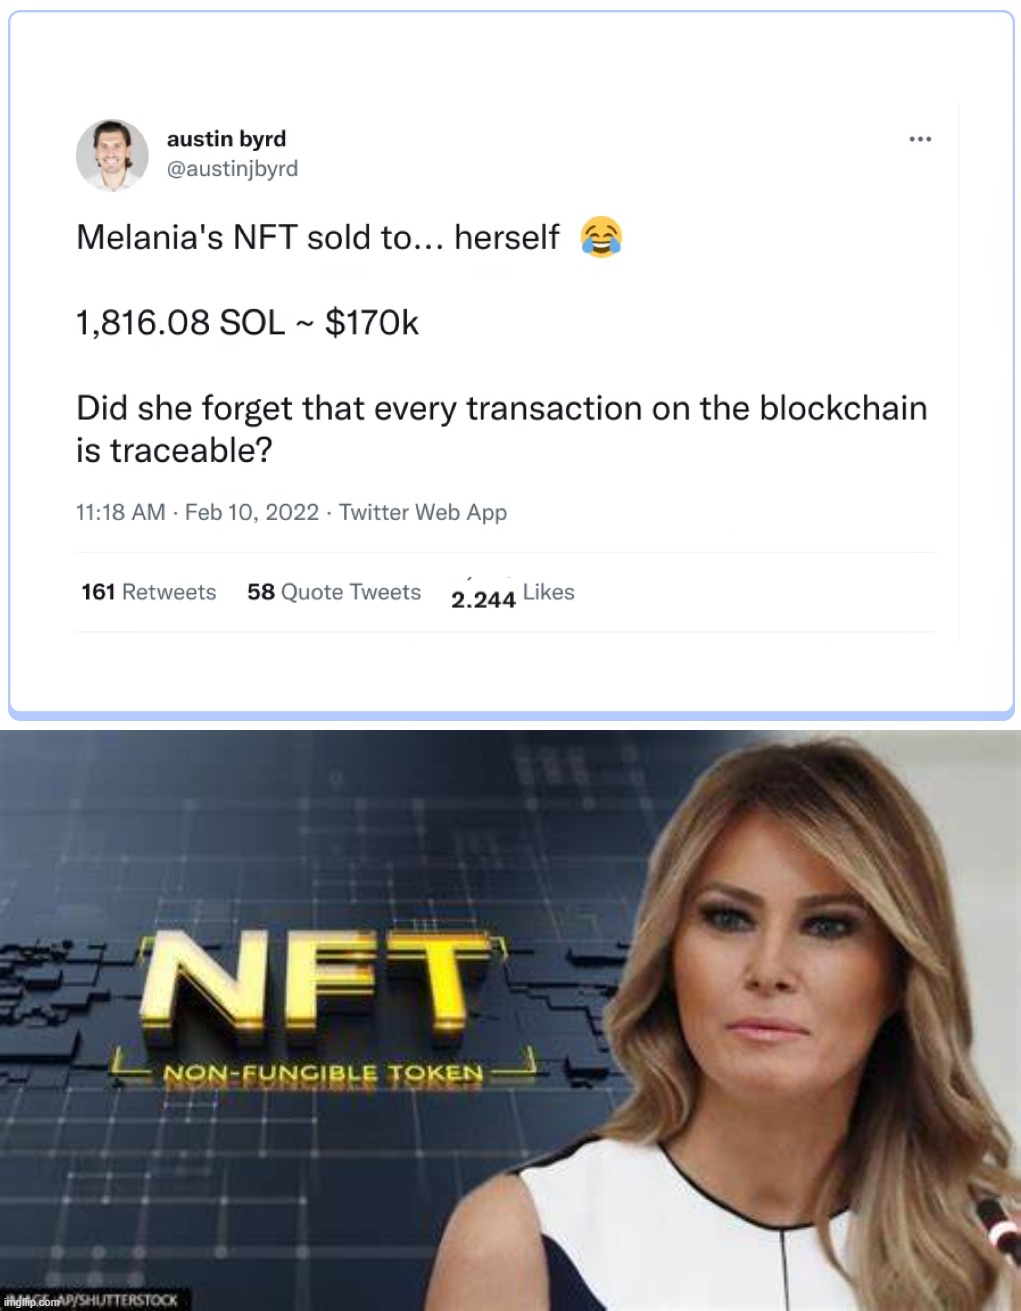 Did Trump buy his own cringey NFTs? There's precedent! XD | image tagged in melania trump nft tweet,melania trump nft,melania trump meme,nft,bruh,blockchain | made w/ Imgflip meme maker